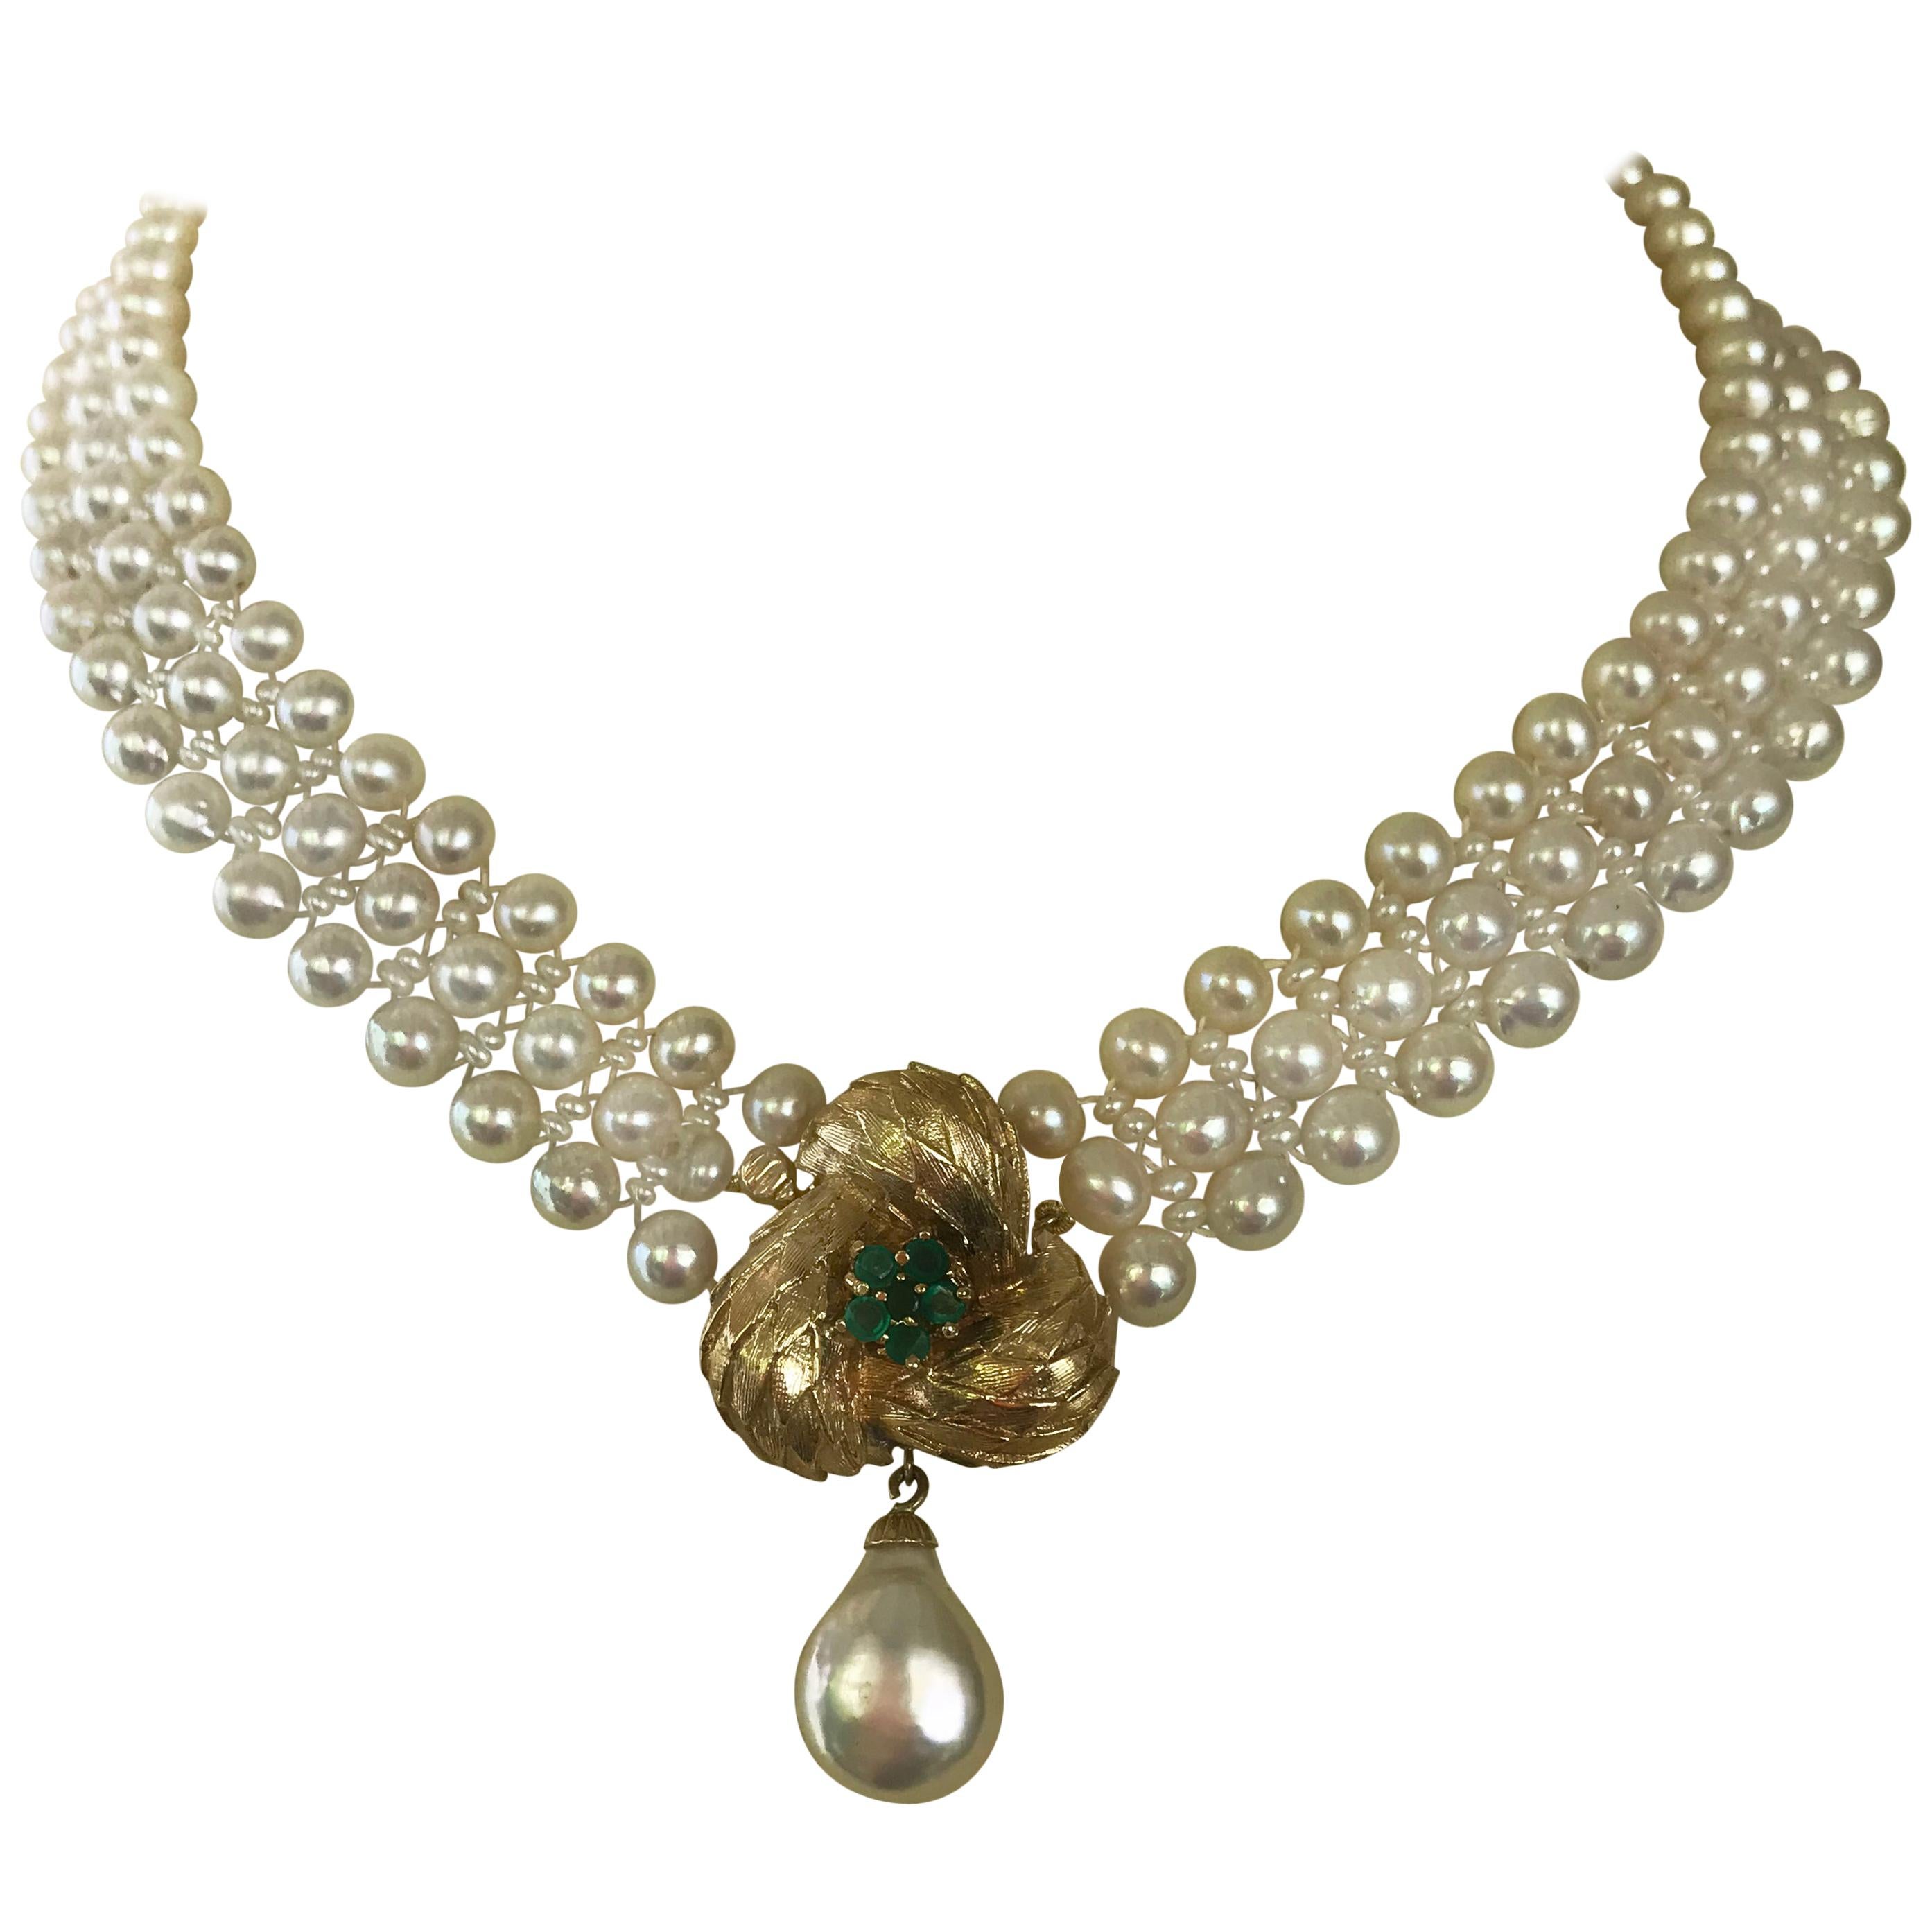 Marina J. Pearl Necklace with Vintage 14k Yellow Gold and Emerald Center-Clasp